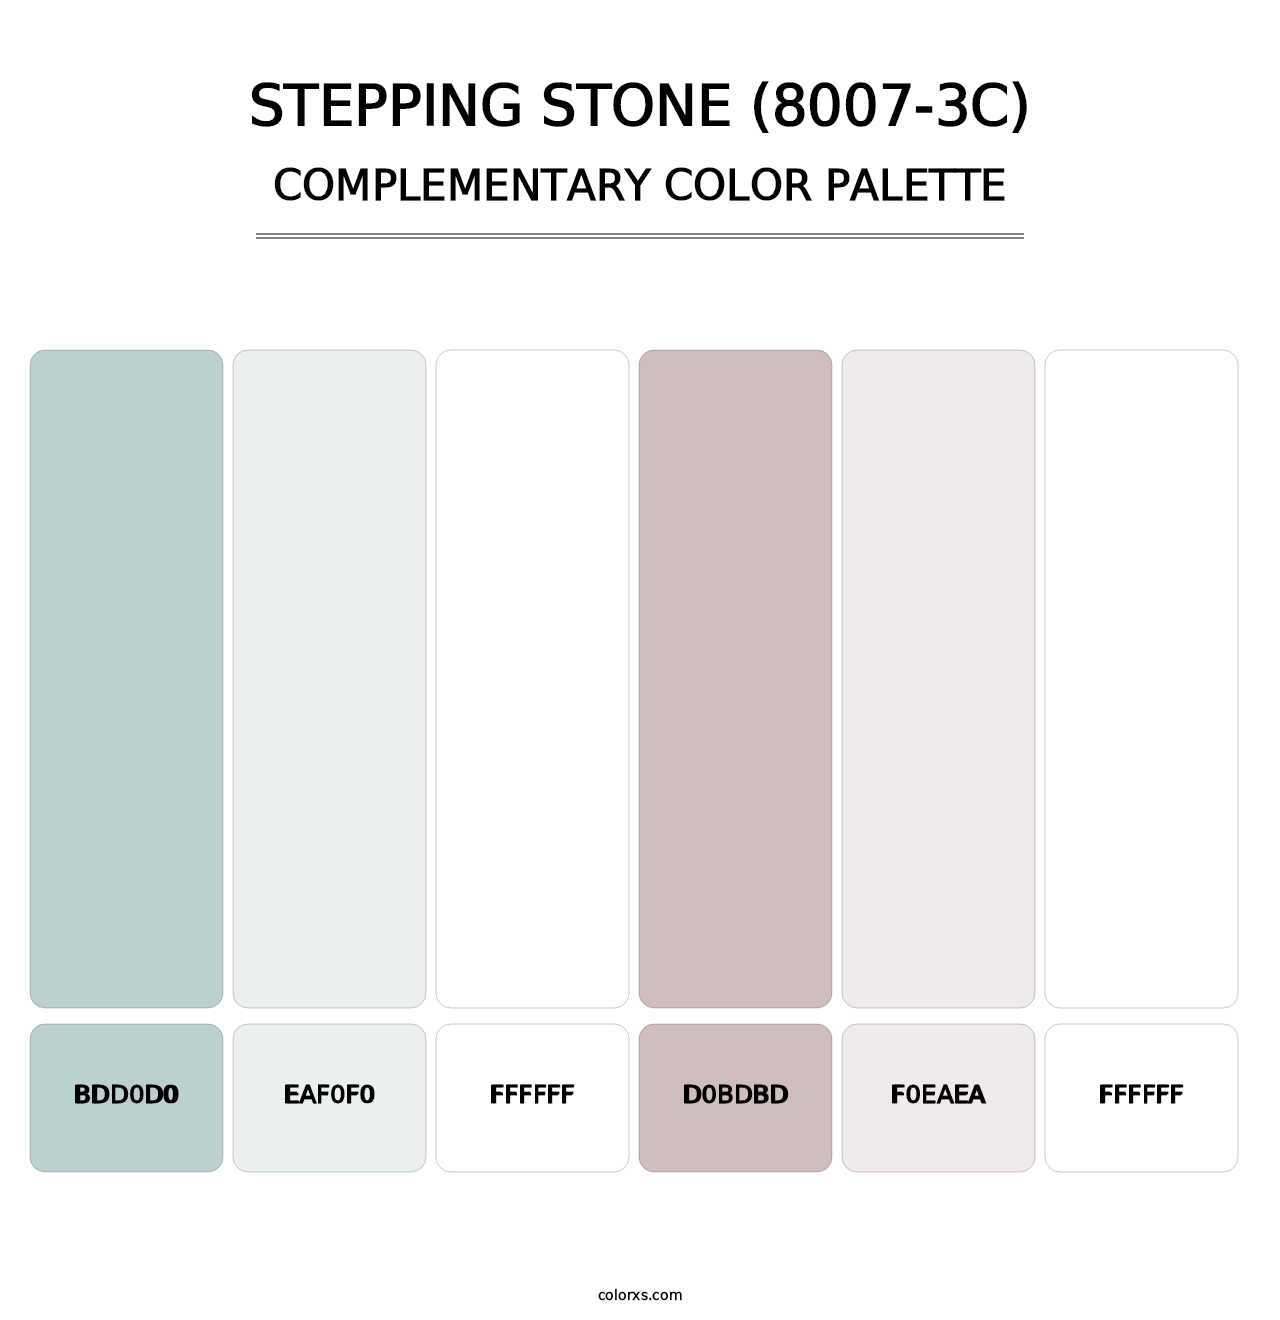 Stepping Stone (8007-3C) - Complementary Color Palette